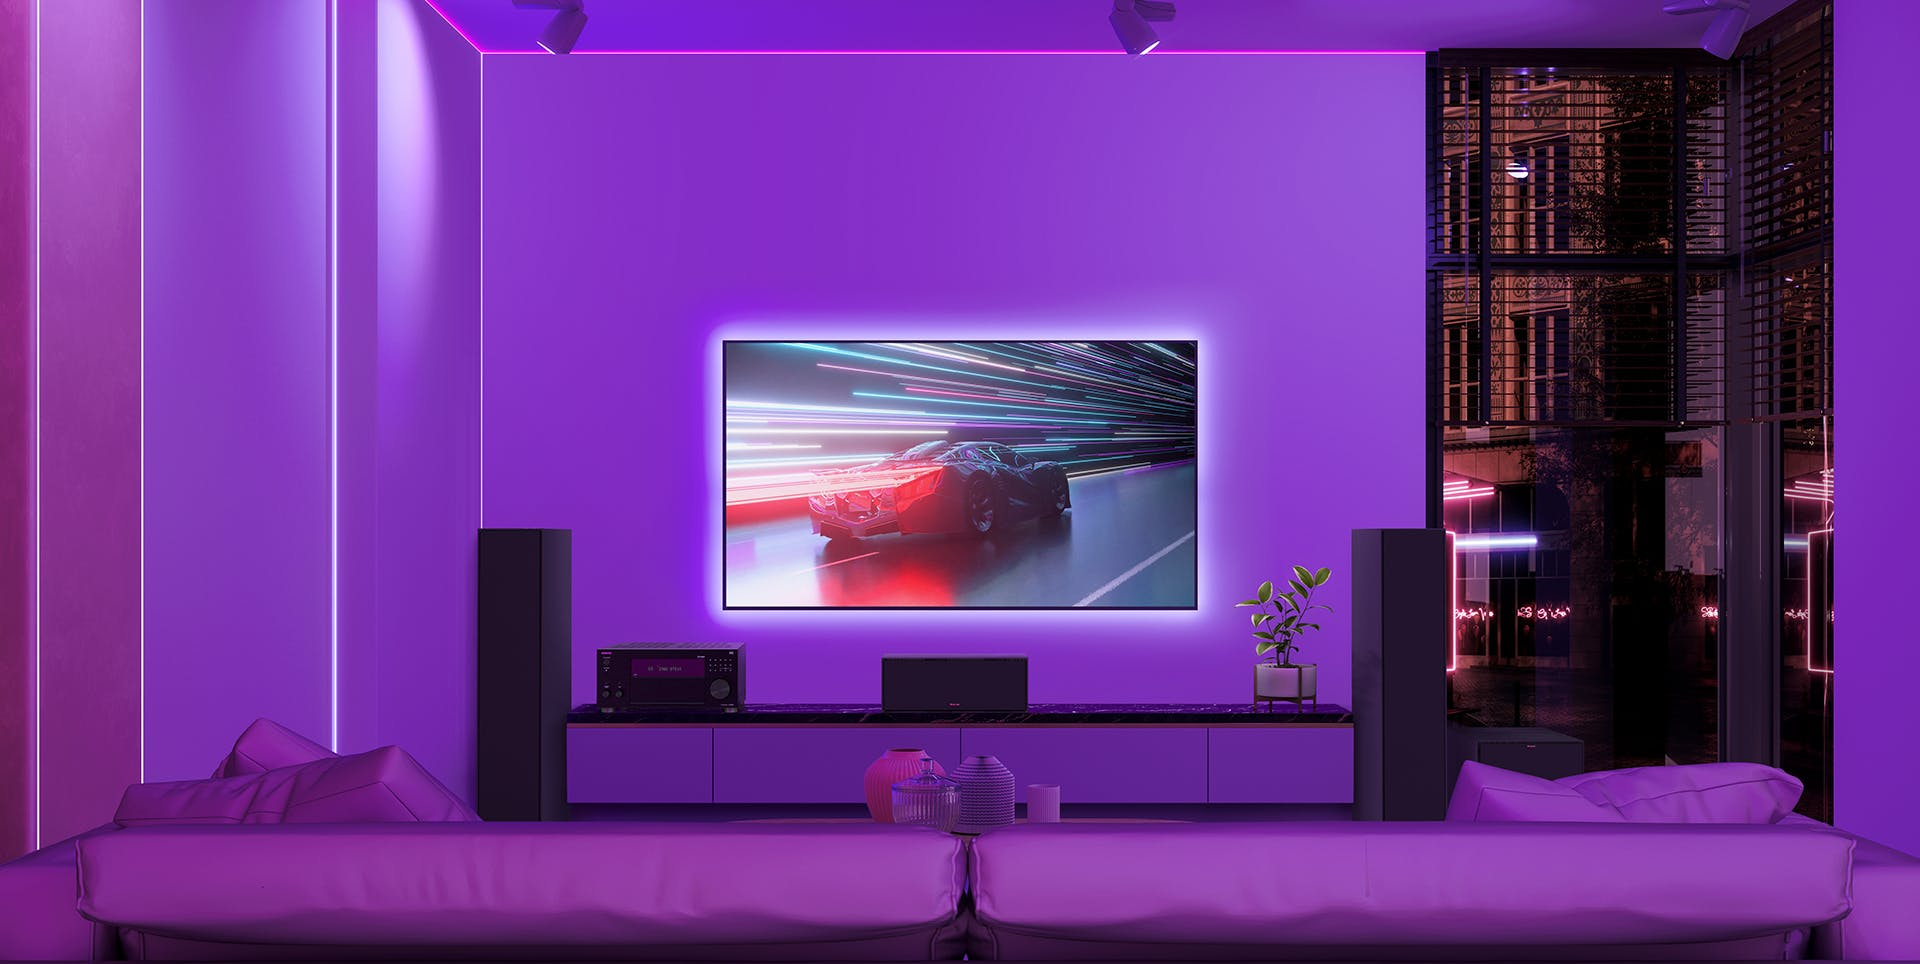 TX RZ70 and Klipsch Home Theater System in Purple LED Lit High Rise Condo 1920x964